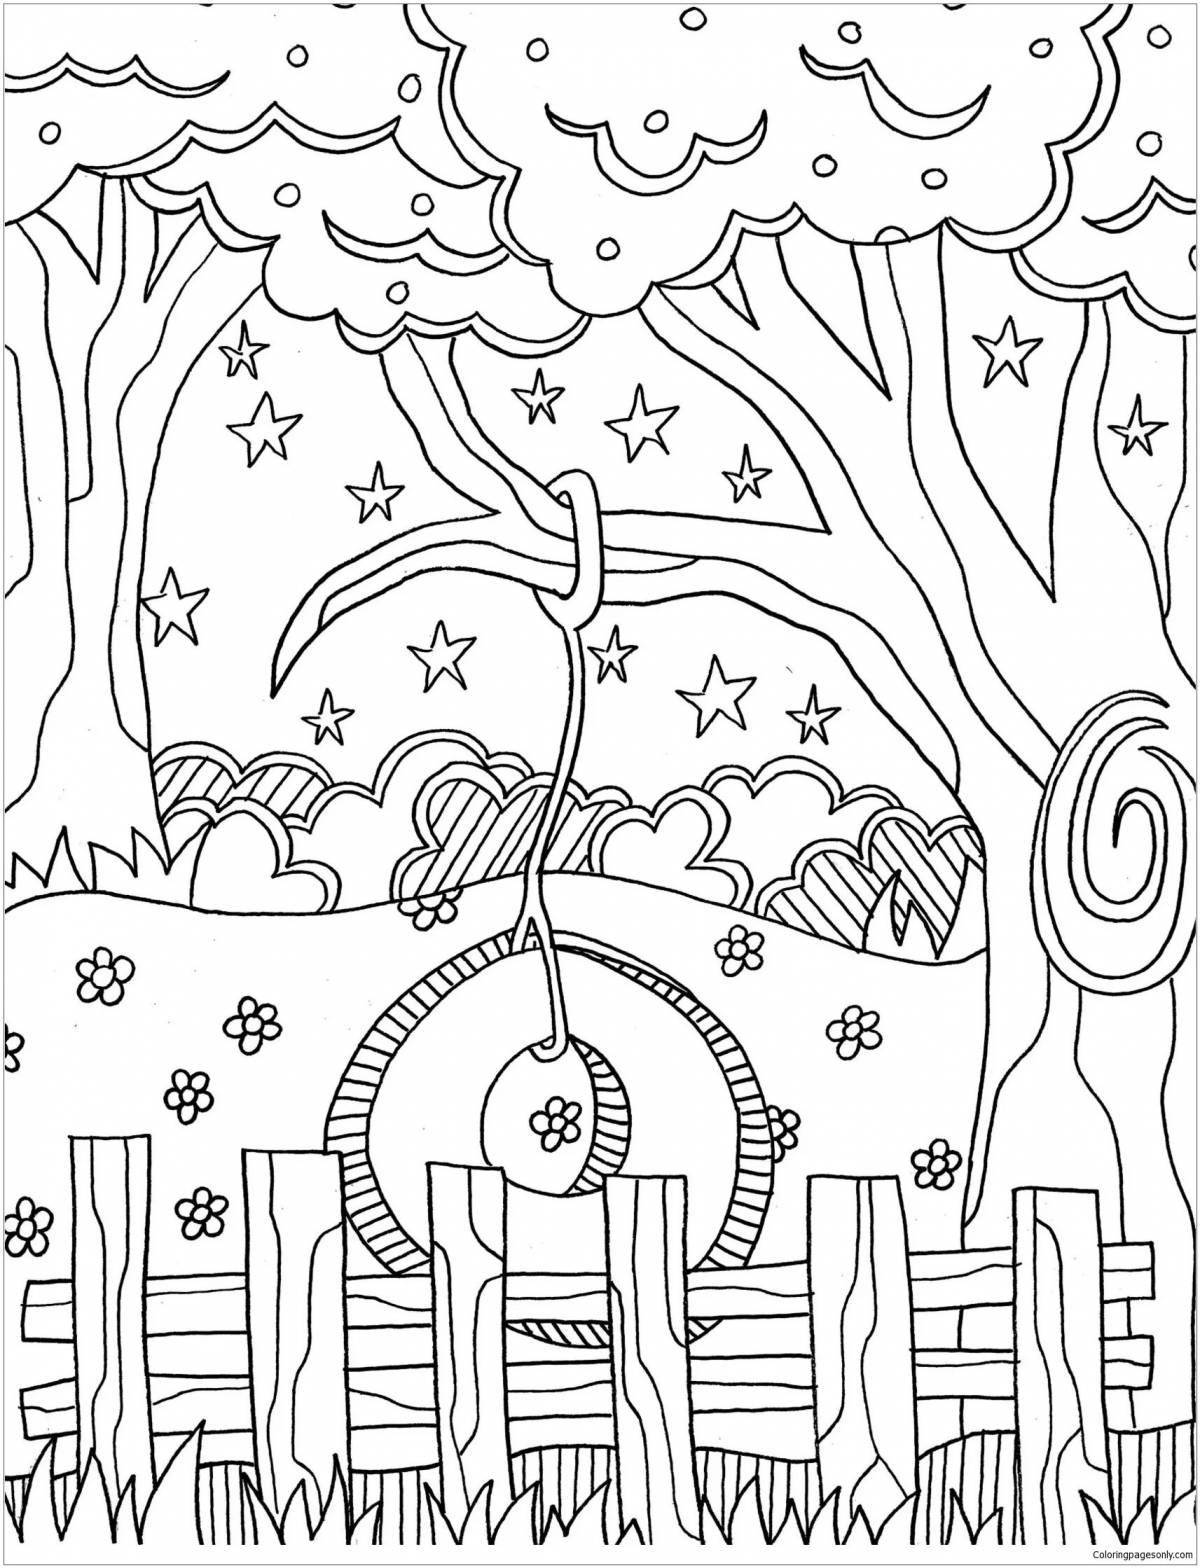 Amazing nature coloring book for 10 year olds